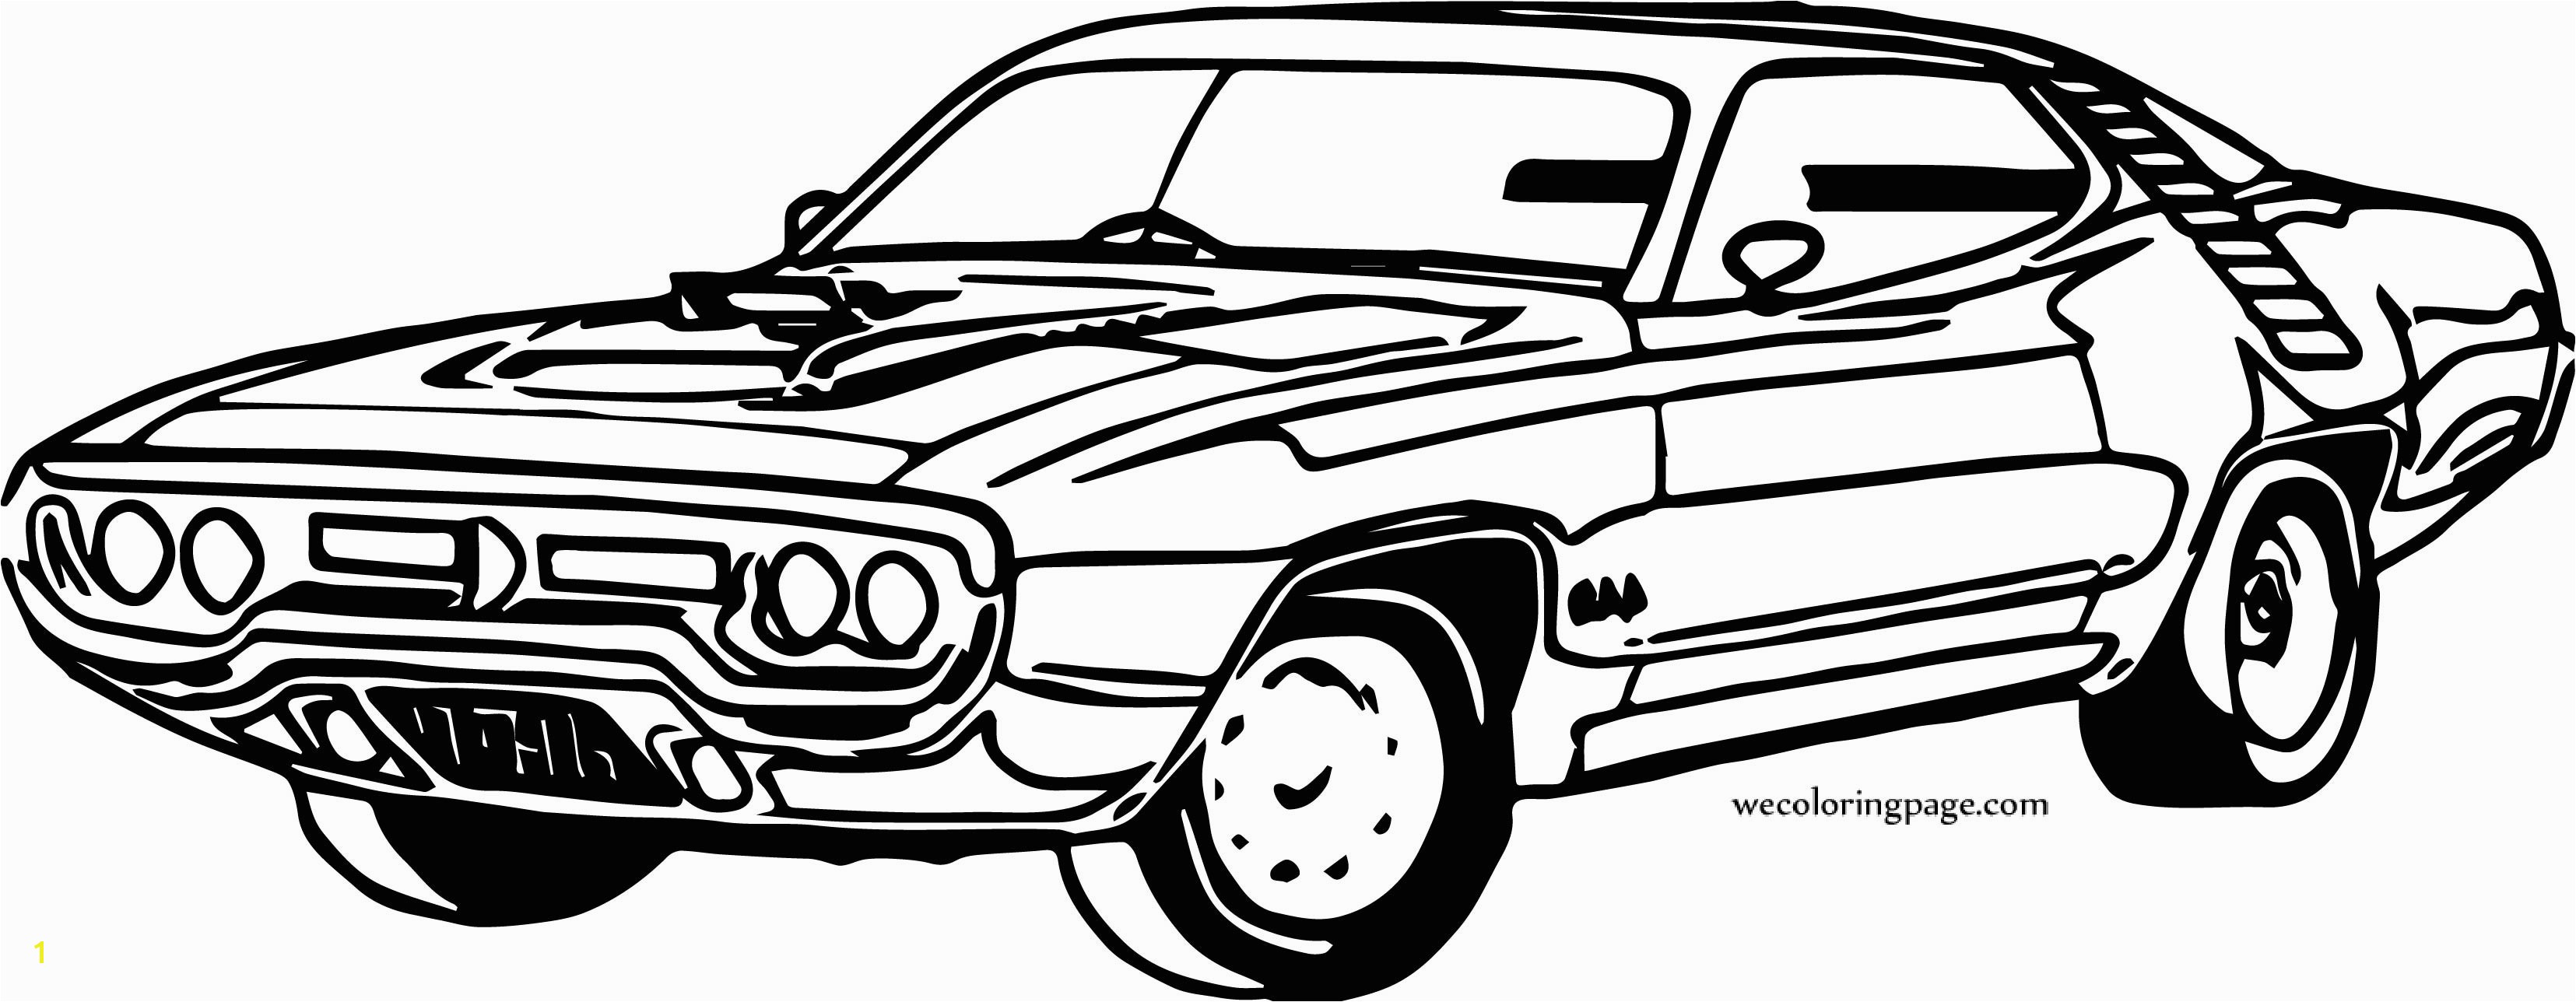 Muscle Car Coloring Pages Inspirationa Cartoon Muscle Cars Coloring Pages Worksheet & Coloring Pages